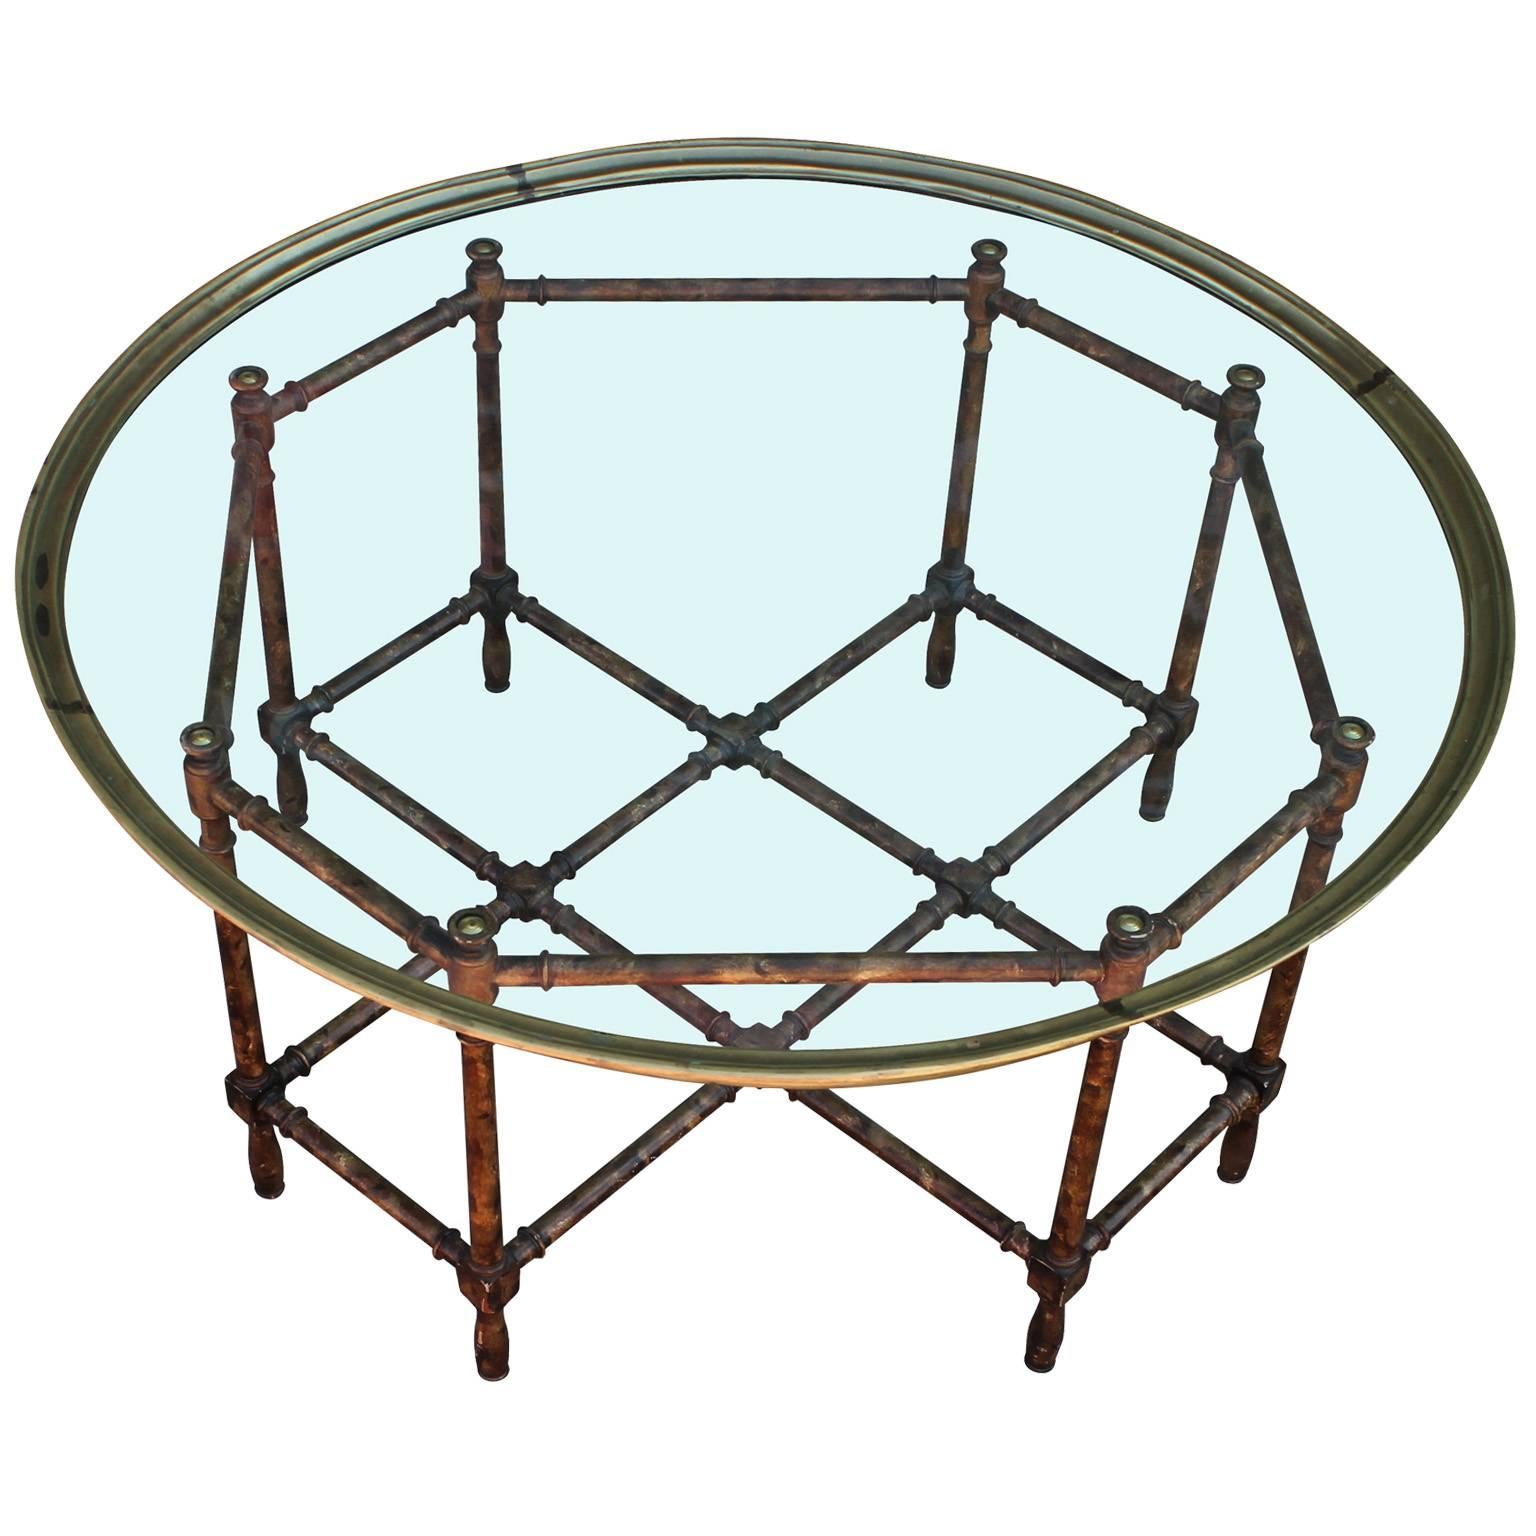 Excellent coffee table by Baker. Faux bamboo base has brass accents. Topped with a sleek, round brass and glass tray. In nice vintage condition.